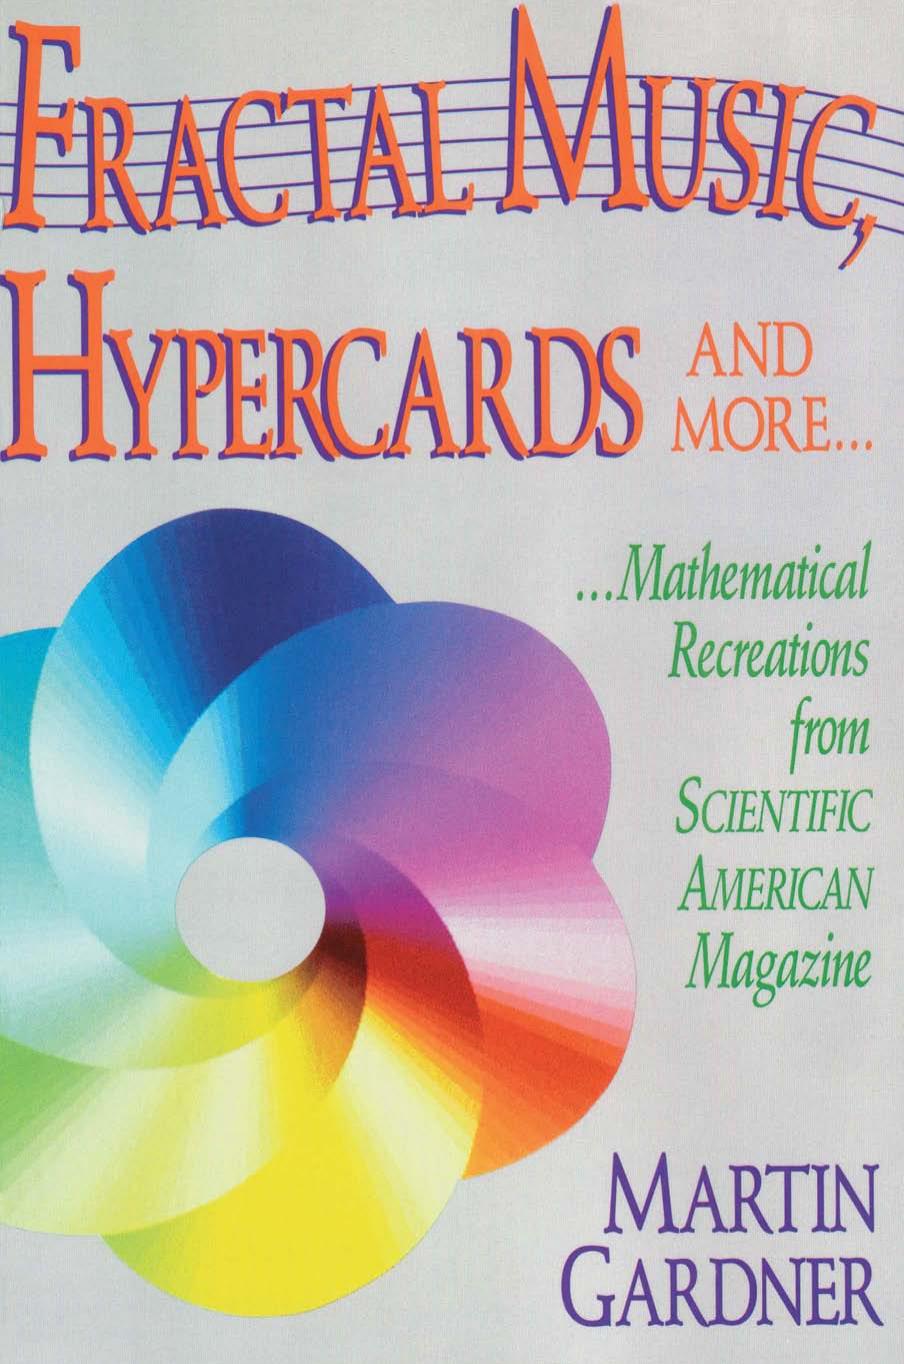 Fractal Music, Hypercards and More . . .